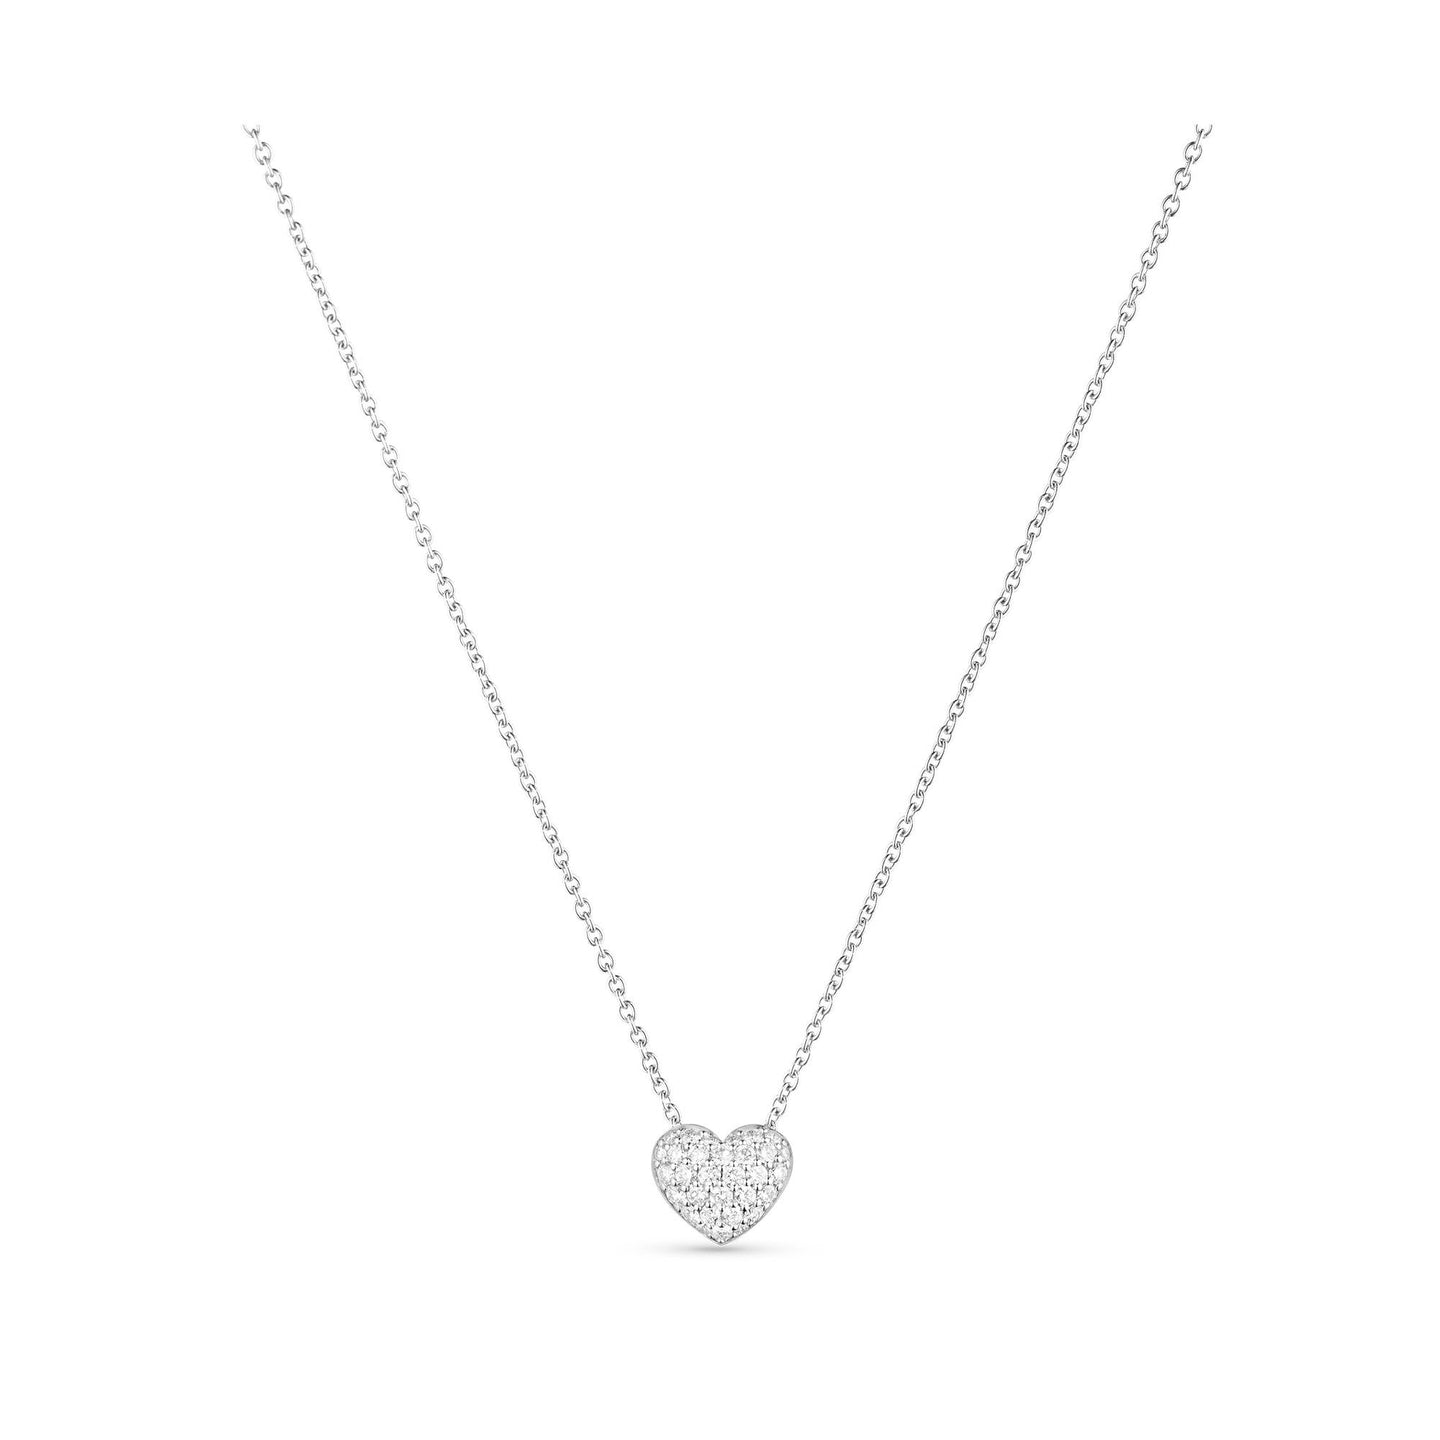 Pillow Heart Medium Pendant in 18ct White Gold with Diamonds